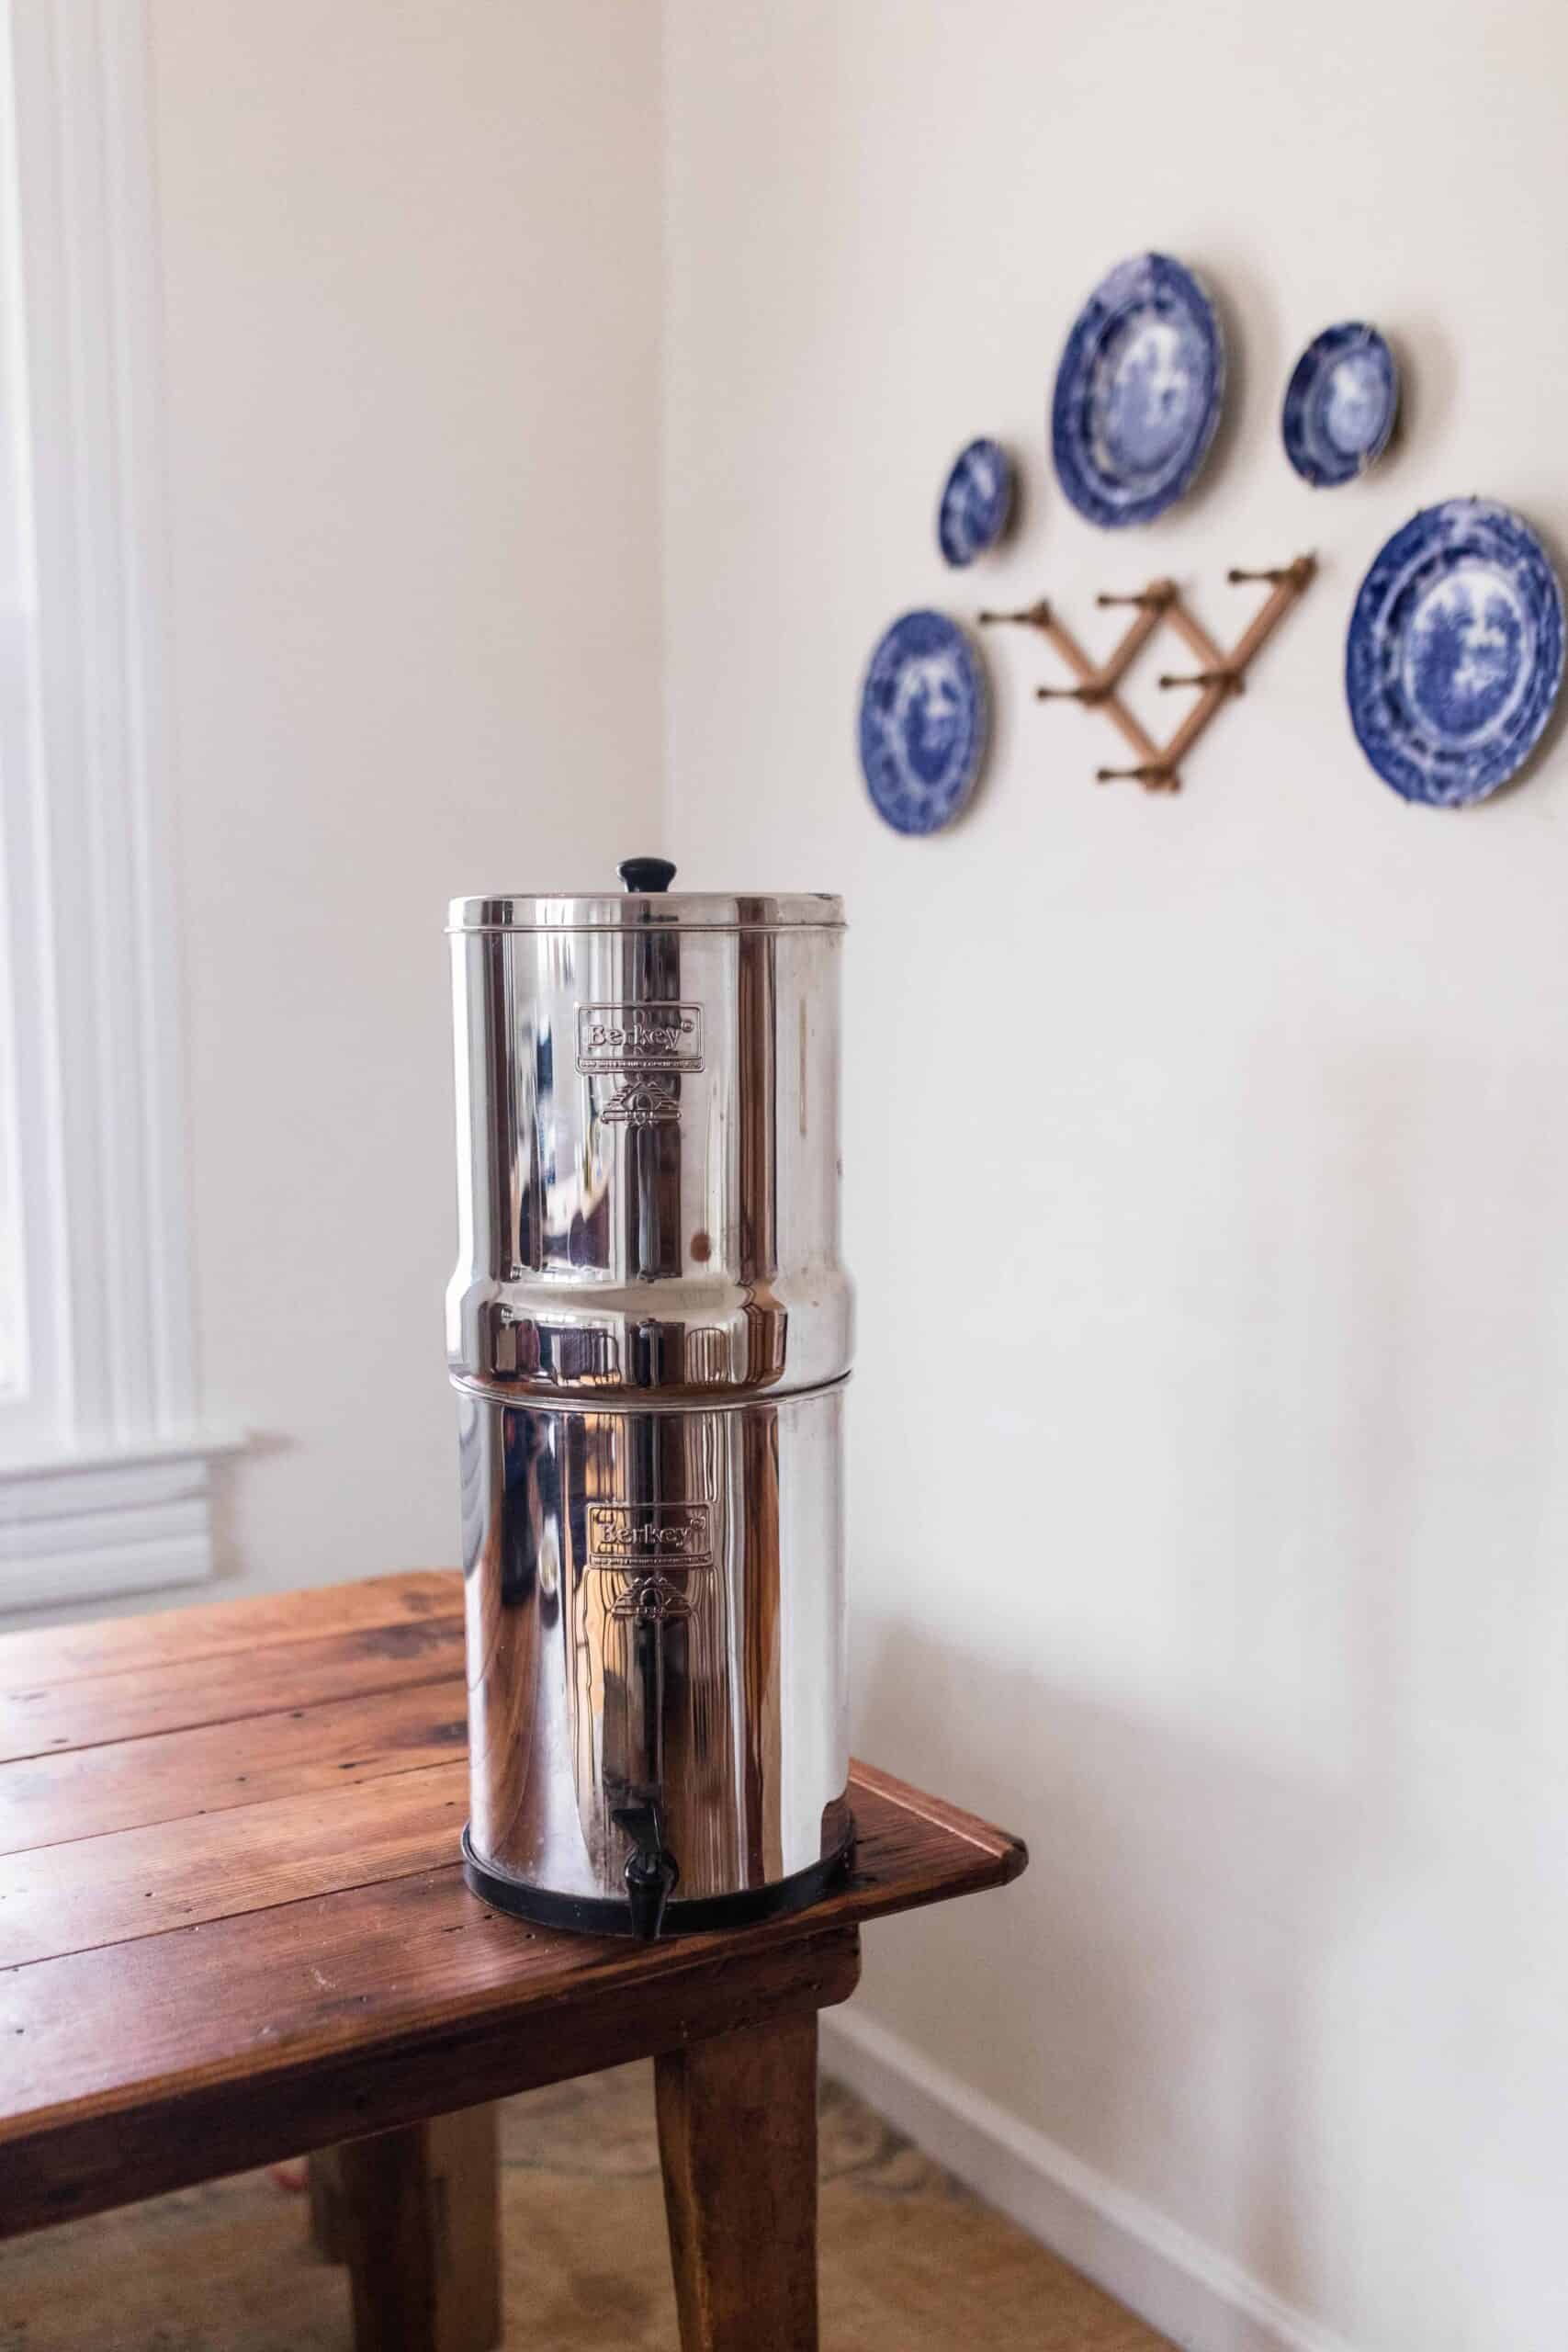 Big Berkey Water Filters for Healthy, Affordable Water at Home